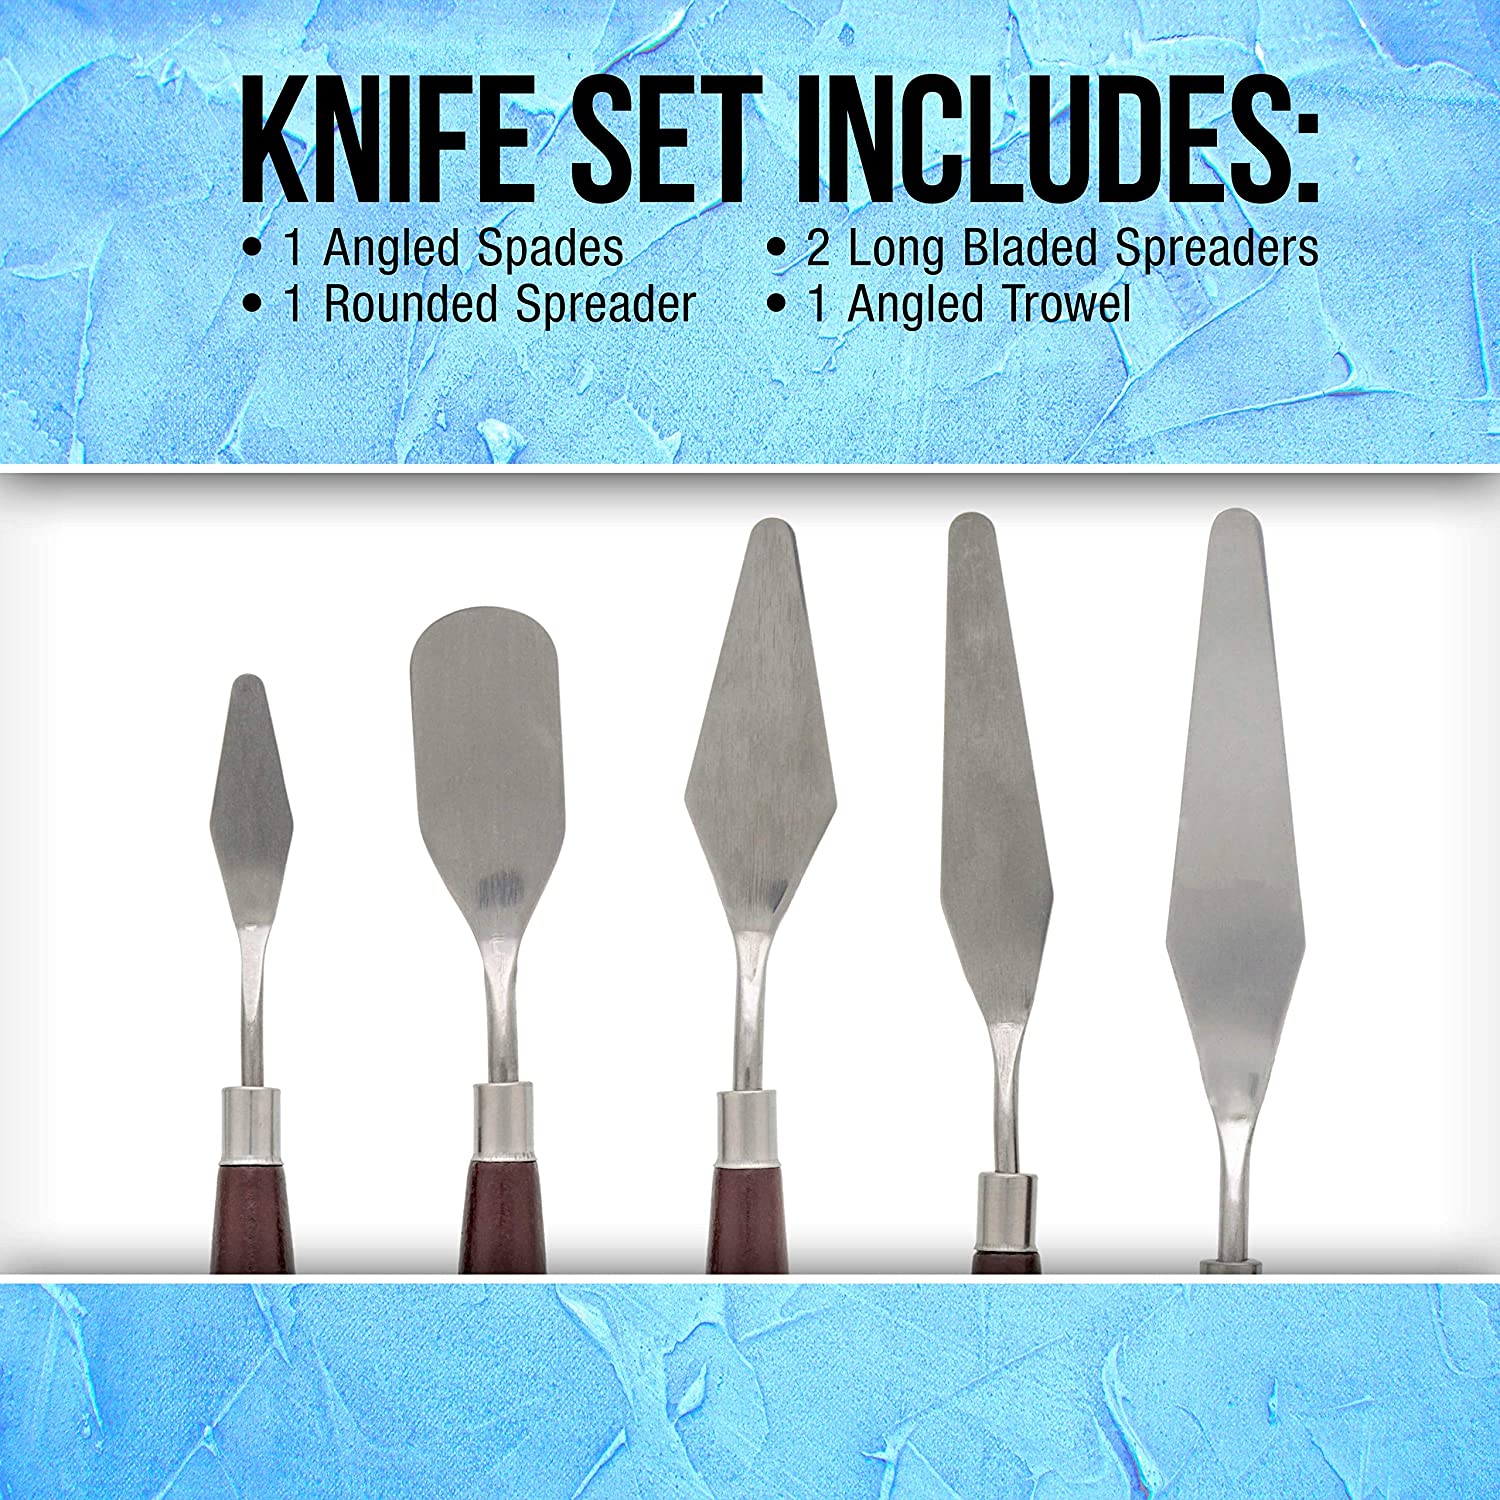  10 Pieces Palette Knife Set Stainless Steel Spatula